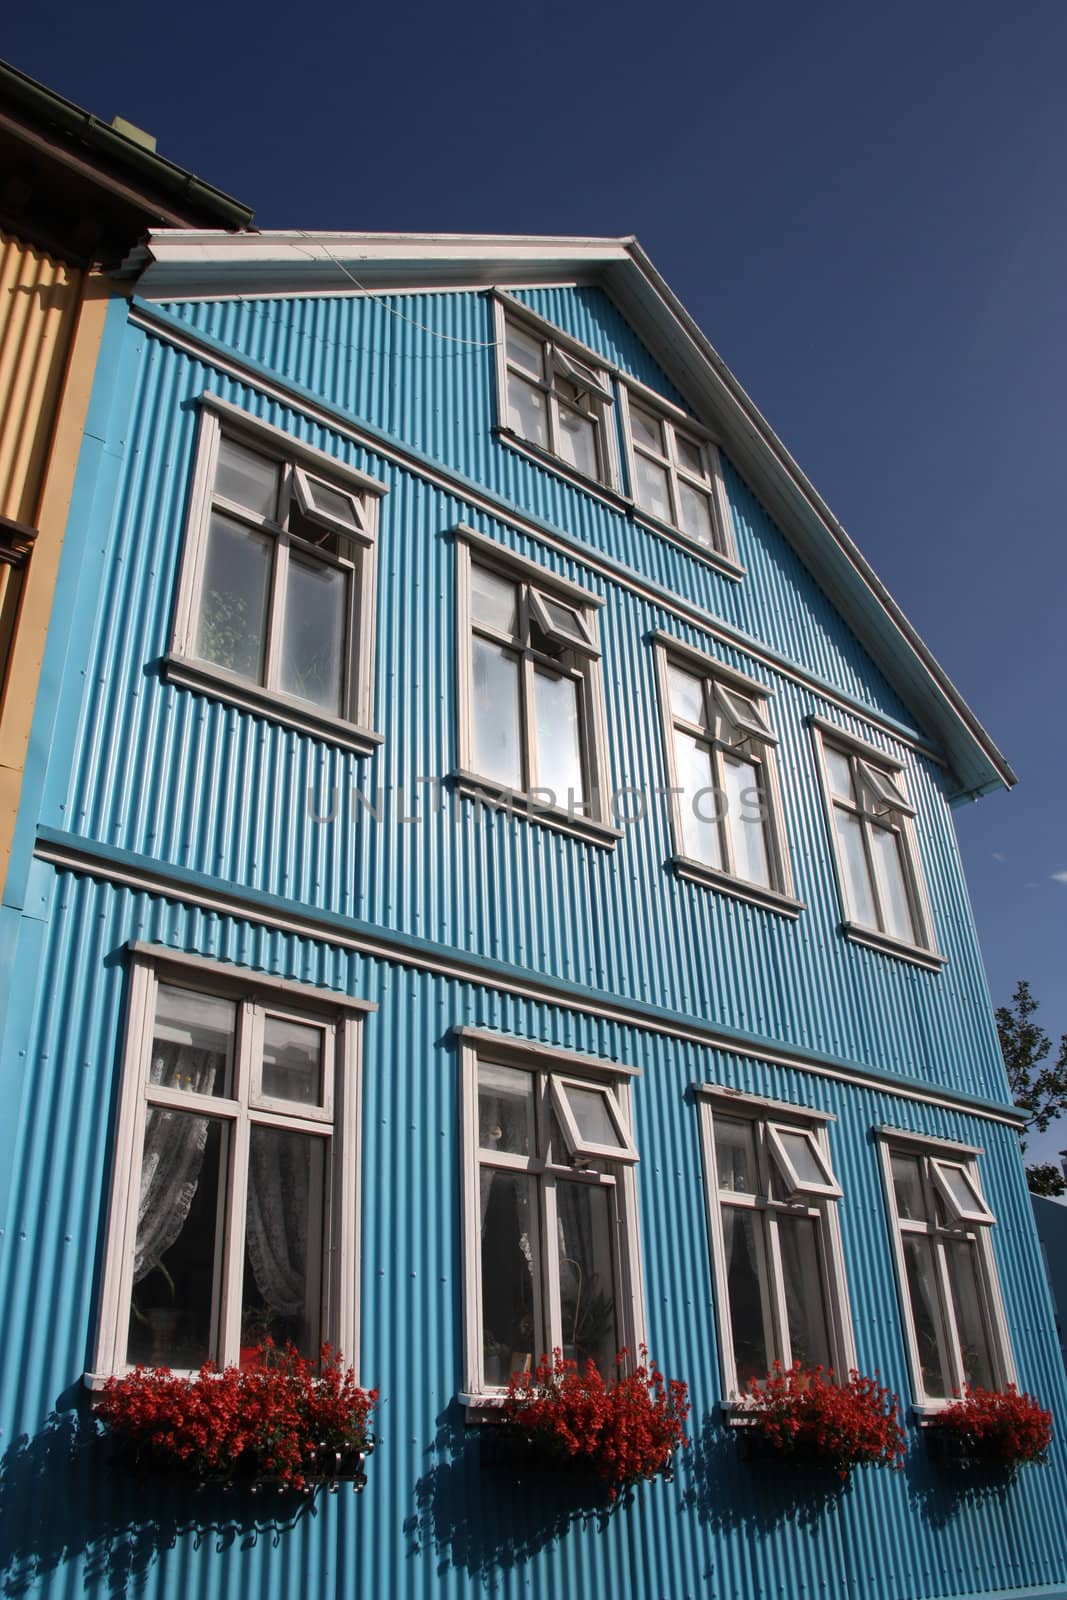 Architecture in Reykjavik, Iceland. Typical corrugated tin building.